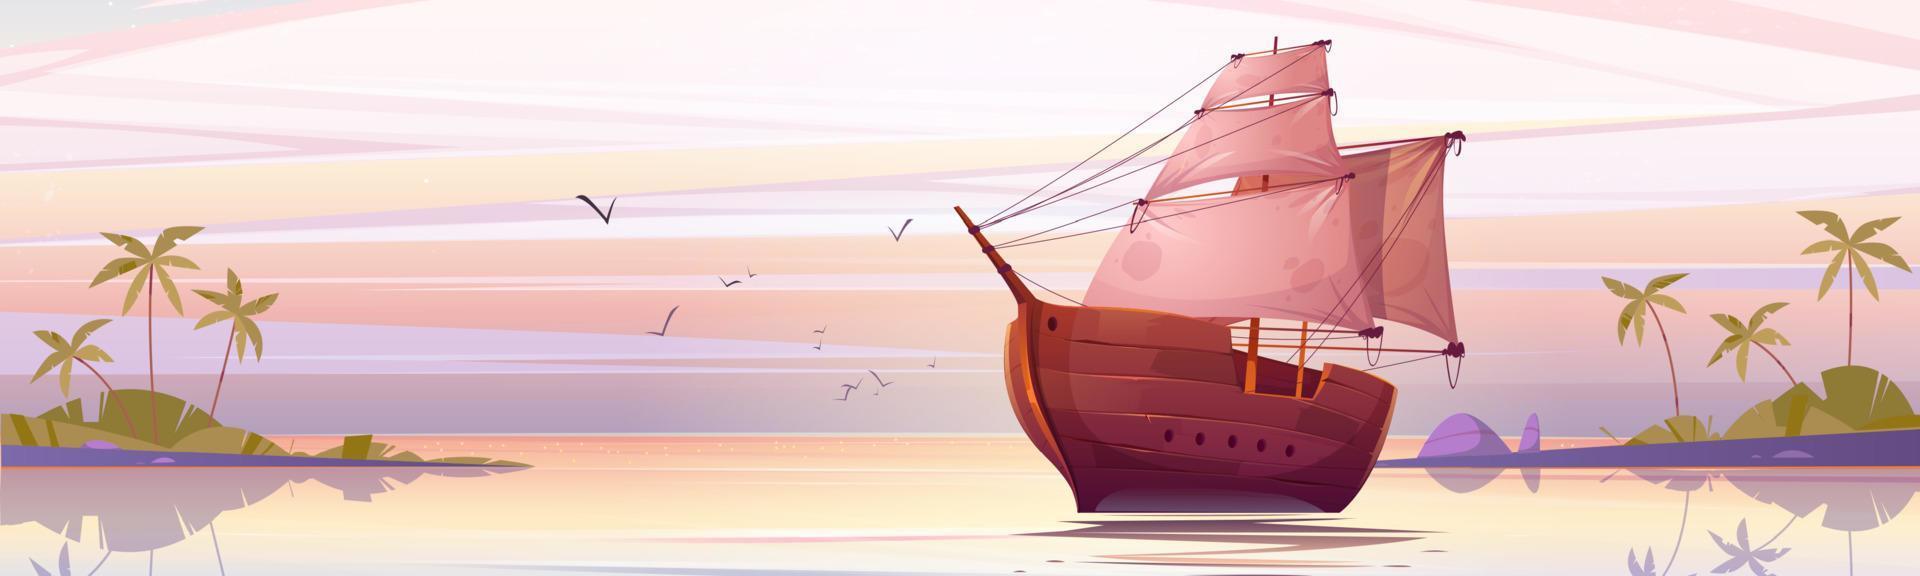 Wooden ship with white sails float under pink sky vector